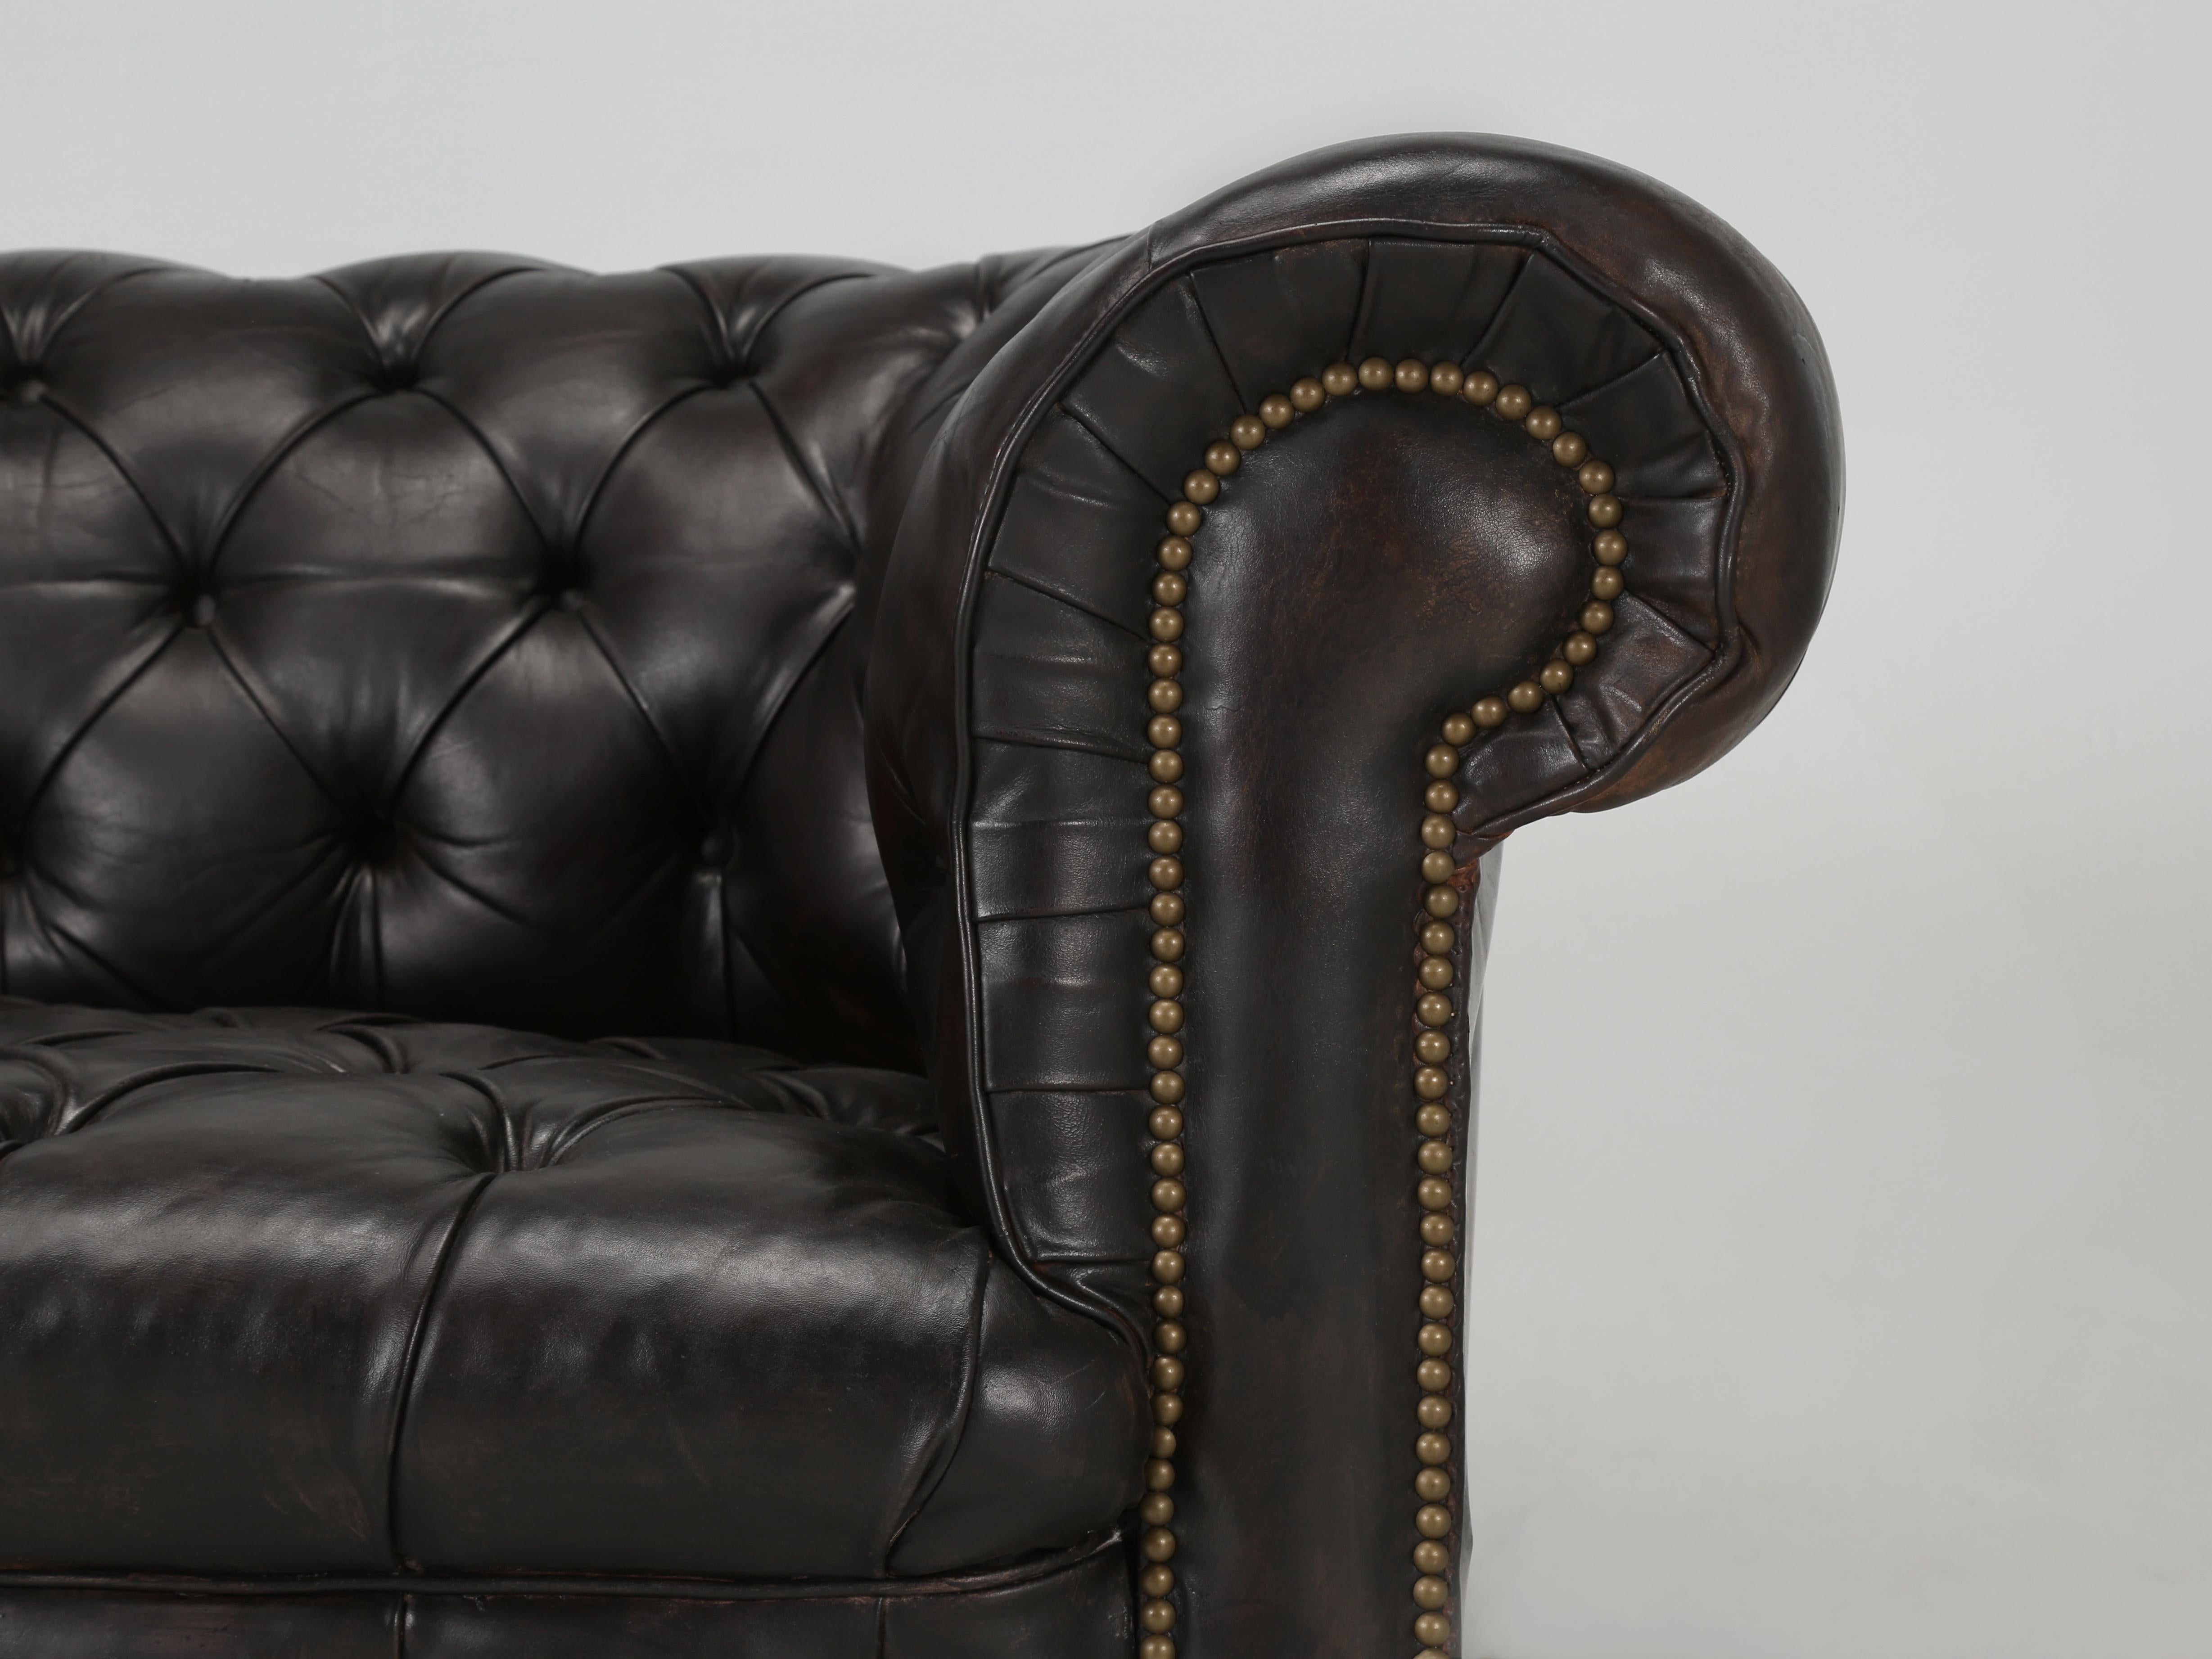 Antique English Tufted Original Leather Chesterfield Sofa Thoroughly Restored For Sale 6